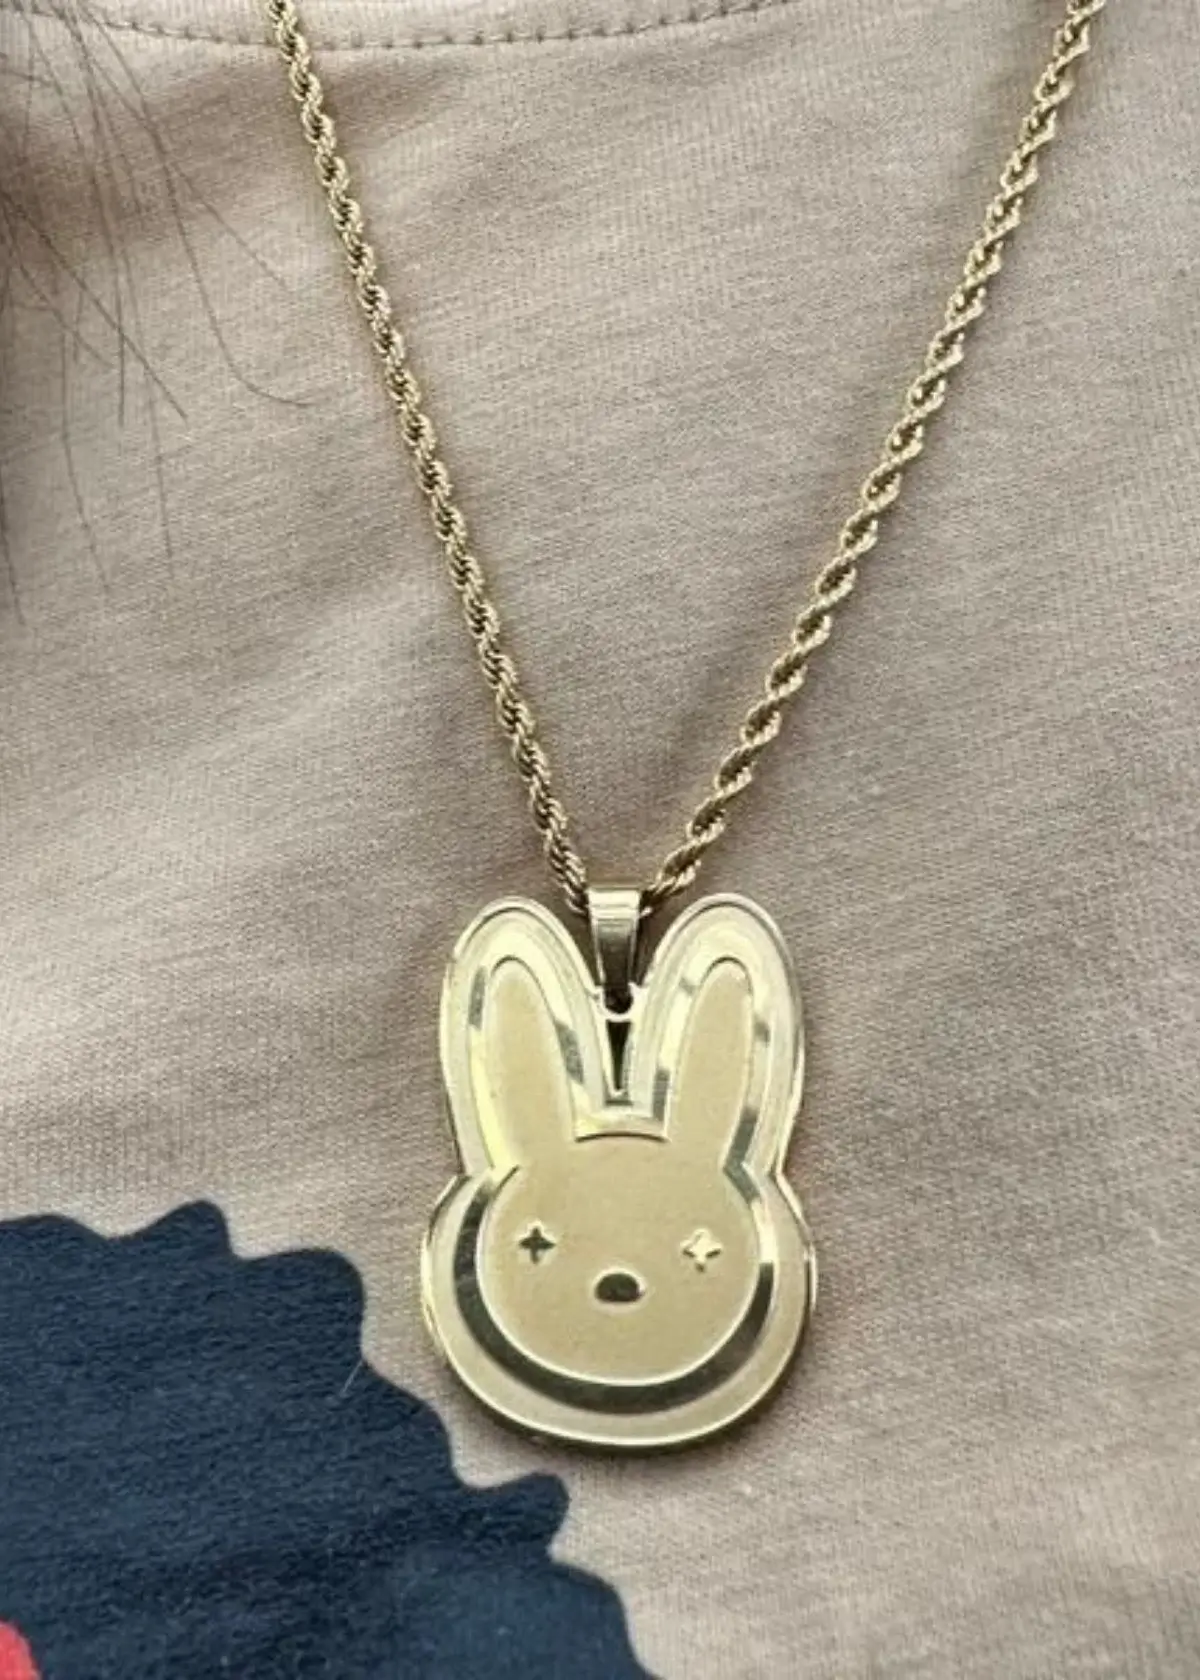 What materials are Bad Bunny necklaces made of?